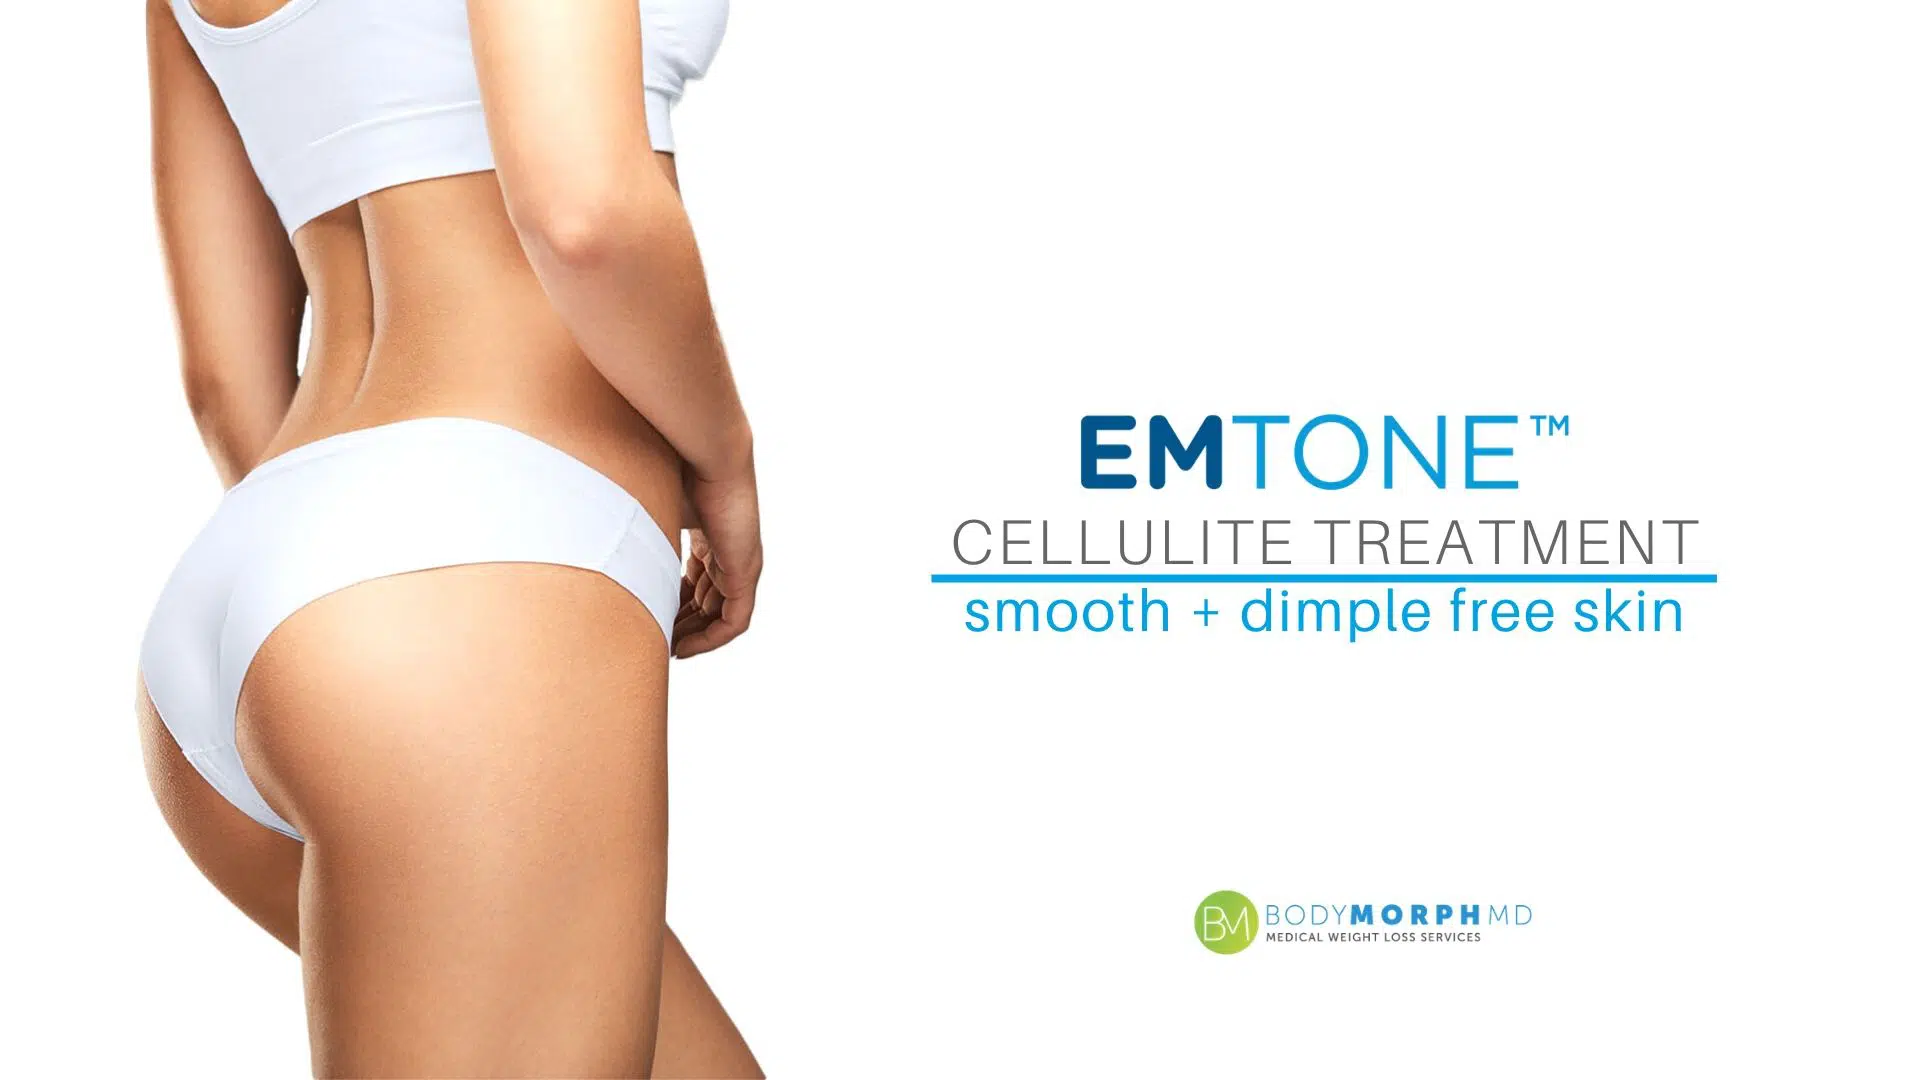 Woman with smooth thighs and buttox after cellulite treatment from EMTone at Body Morph MD, in Harrision New York.